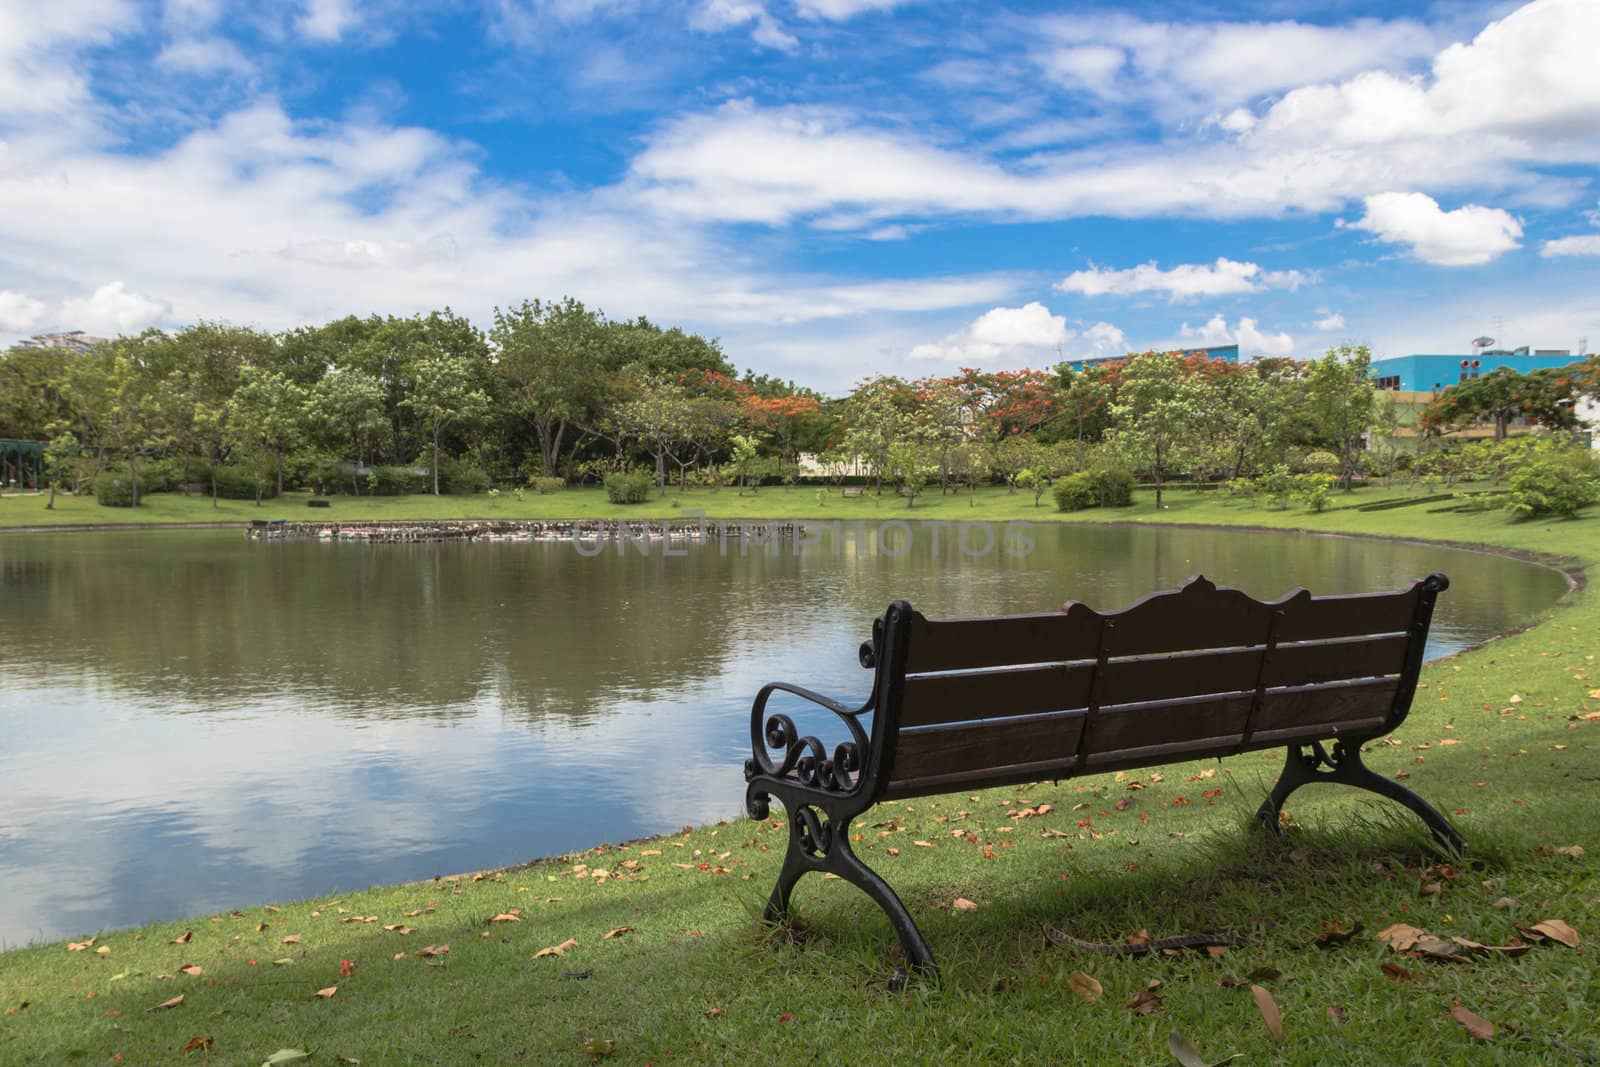 Bench in the park near small lake by punpleng